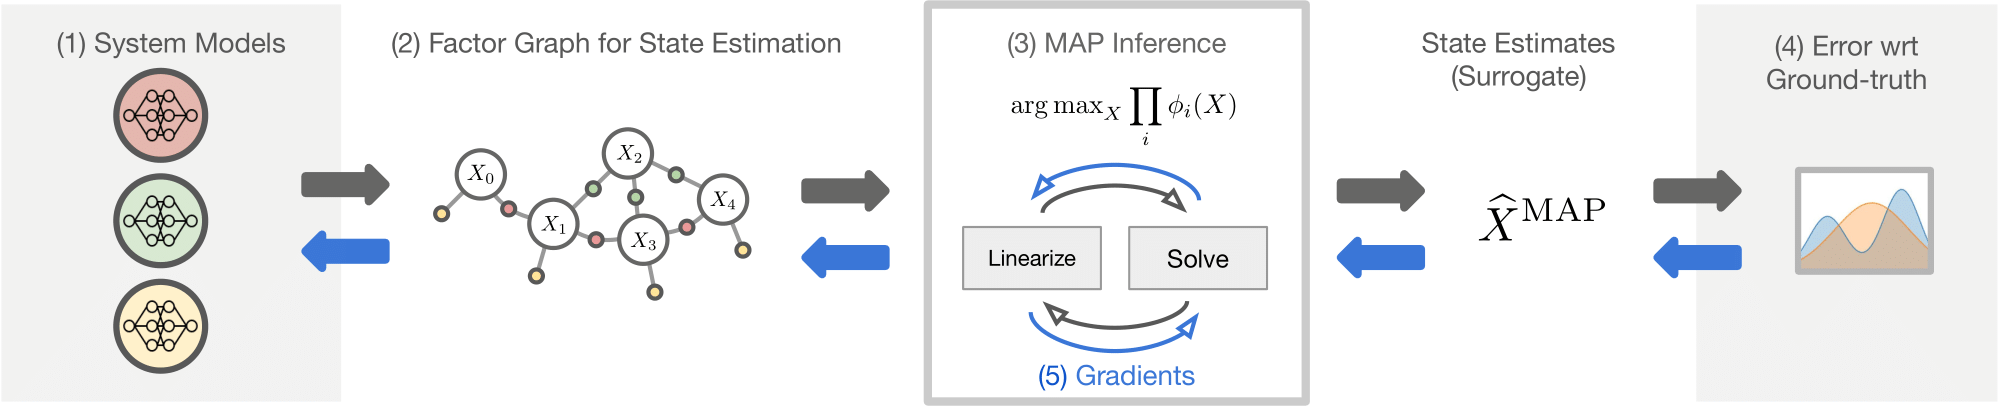 Figure describing the overall training pipeline proposed by our IROS paper. Contains five sections, arranged left to right: (1) system models, (2) factor graphs for state estimation, (3) MAP inference, (4) state estimates, and (5) errors with respect to ground-truth. Arrows show how gradients are backpropagated from right to left, starting directly from the final stage (error with respect to ground-truth) back to parameters of the system models.